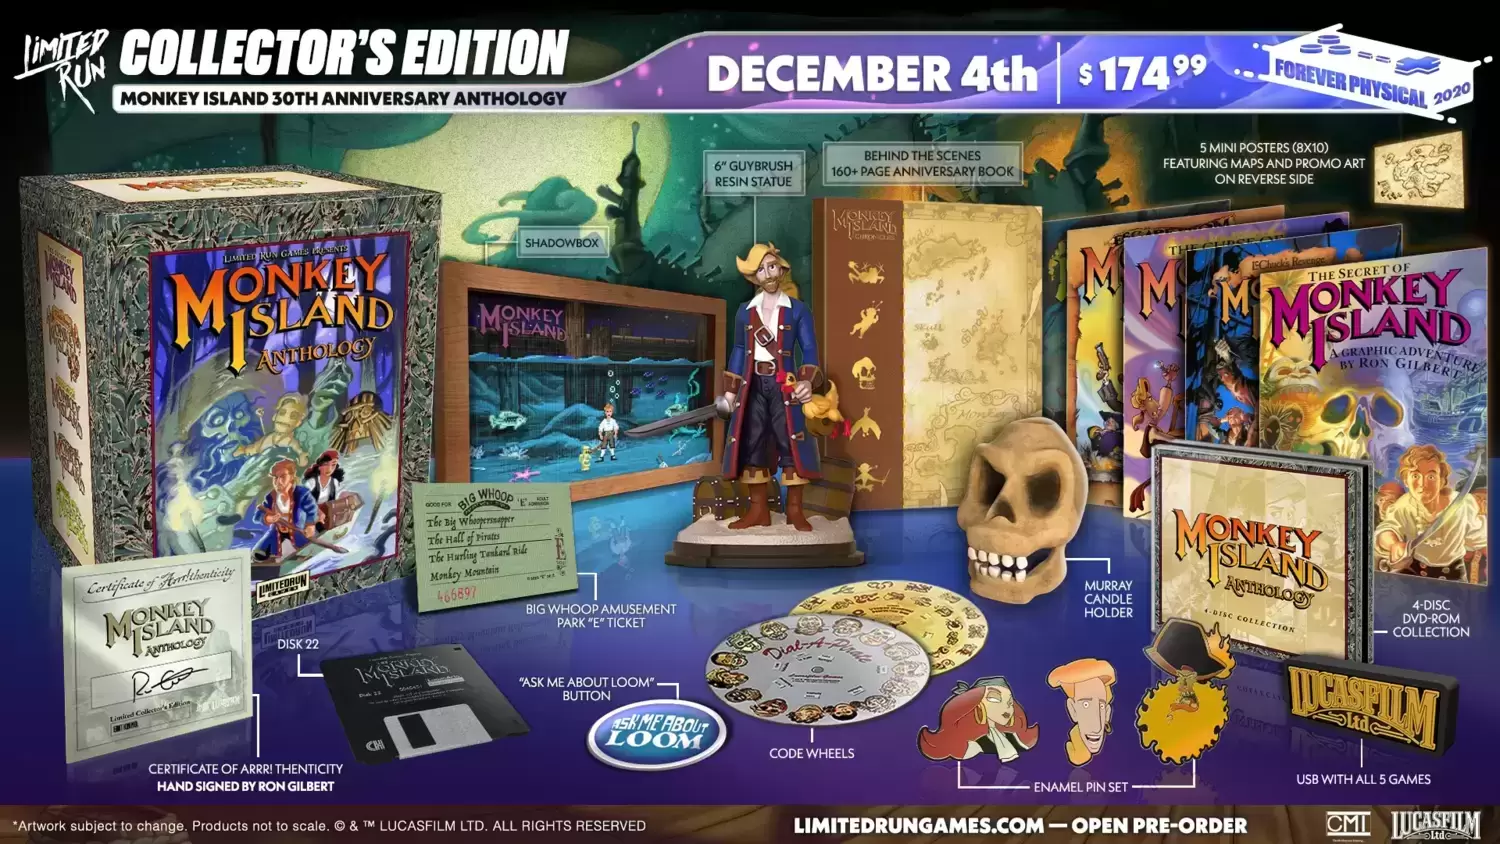 PC Games - Monkey Island 30th Anniversary Anthology - Limited Run Games